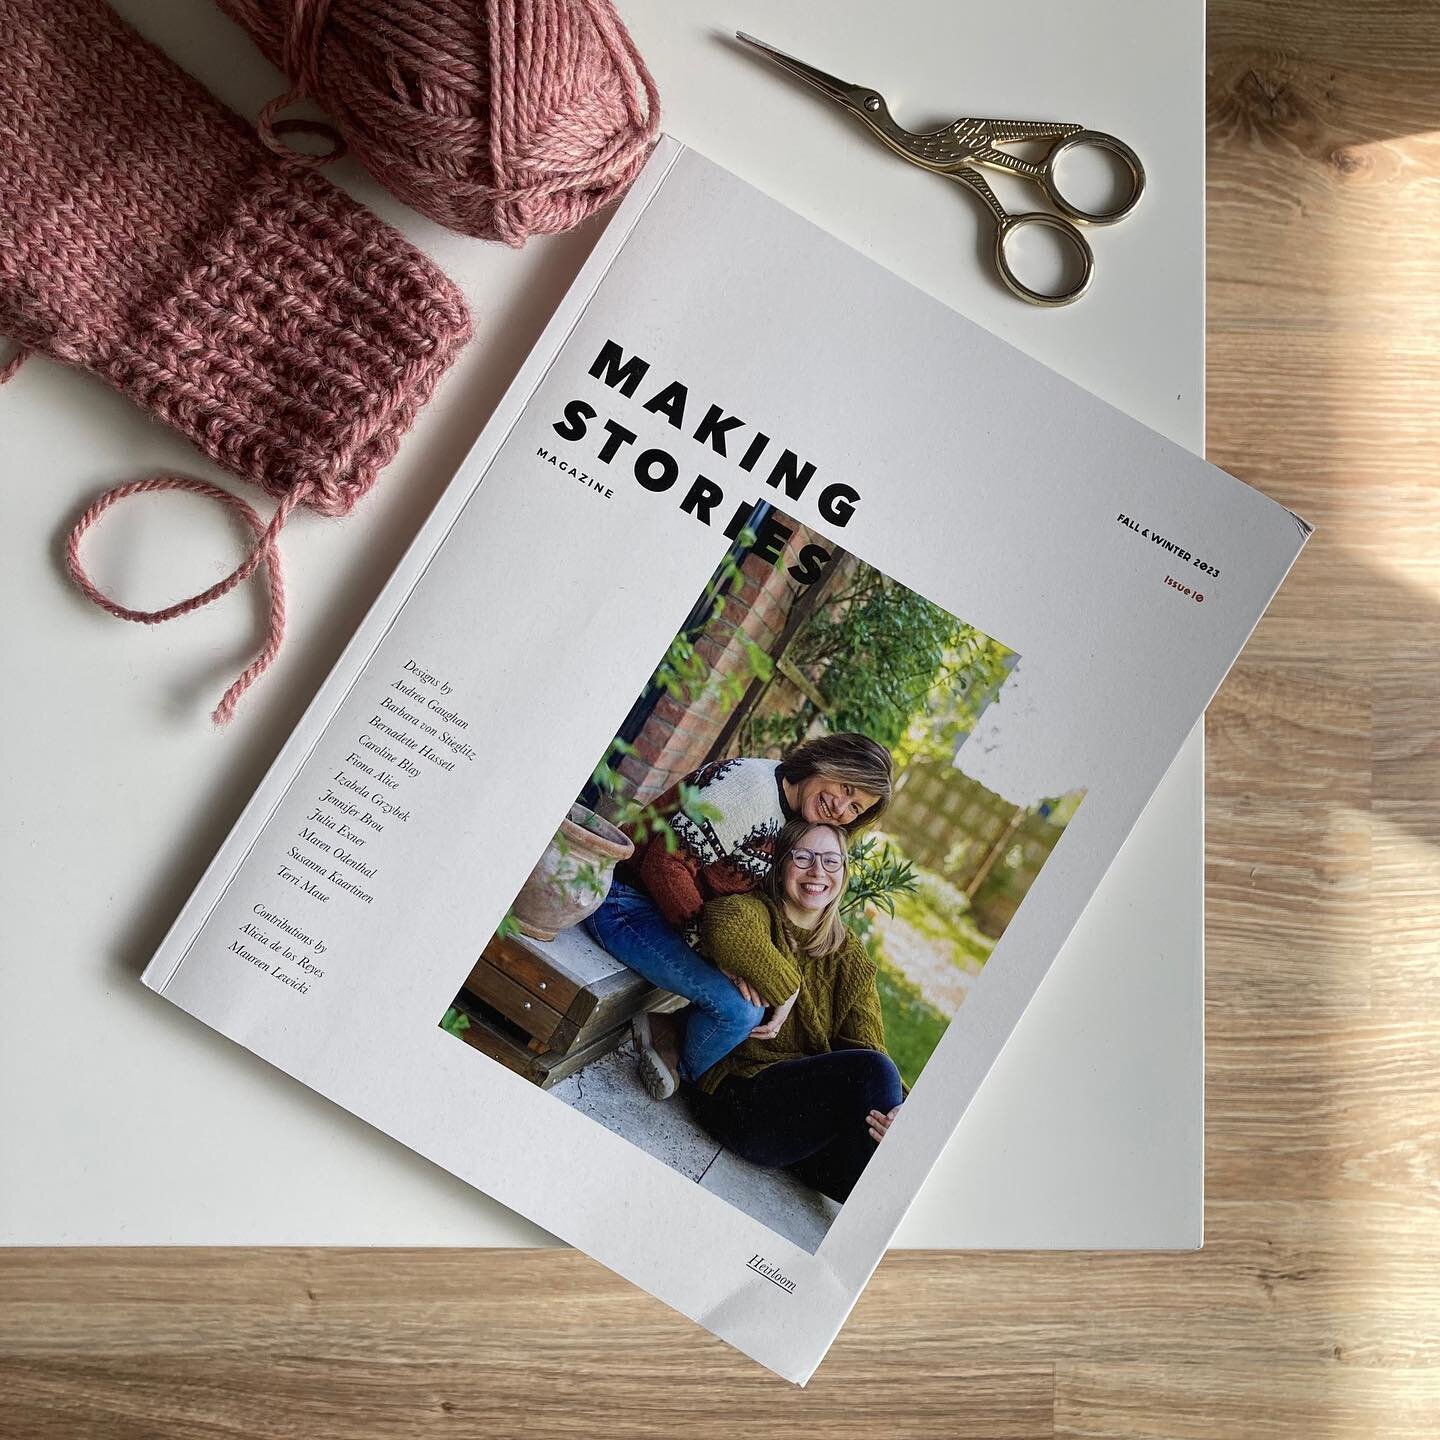 It&rsquo;s such a special moment when I can share that you&rsquo;ll find my new sock design in Issue 10 of @_makingstories! 
⠀⠀⠀⠀⠀⠀⠀⠀⠀
It&rsquo;s one of my favorite knitting magazines and I&rsquo;m truly honored to be a part of this beautiful issue -